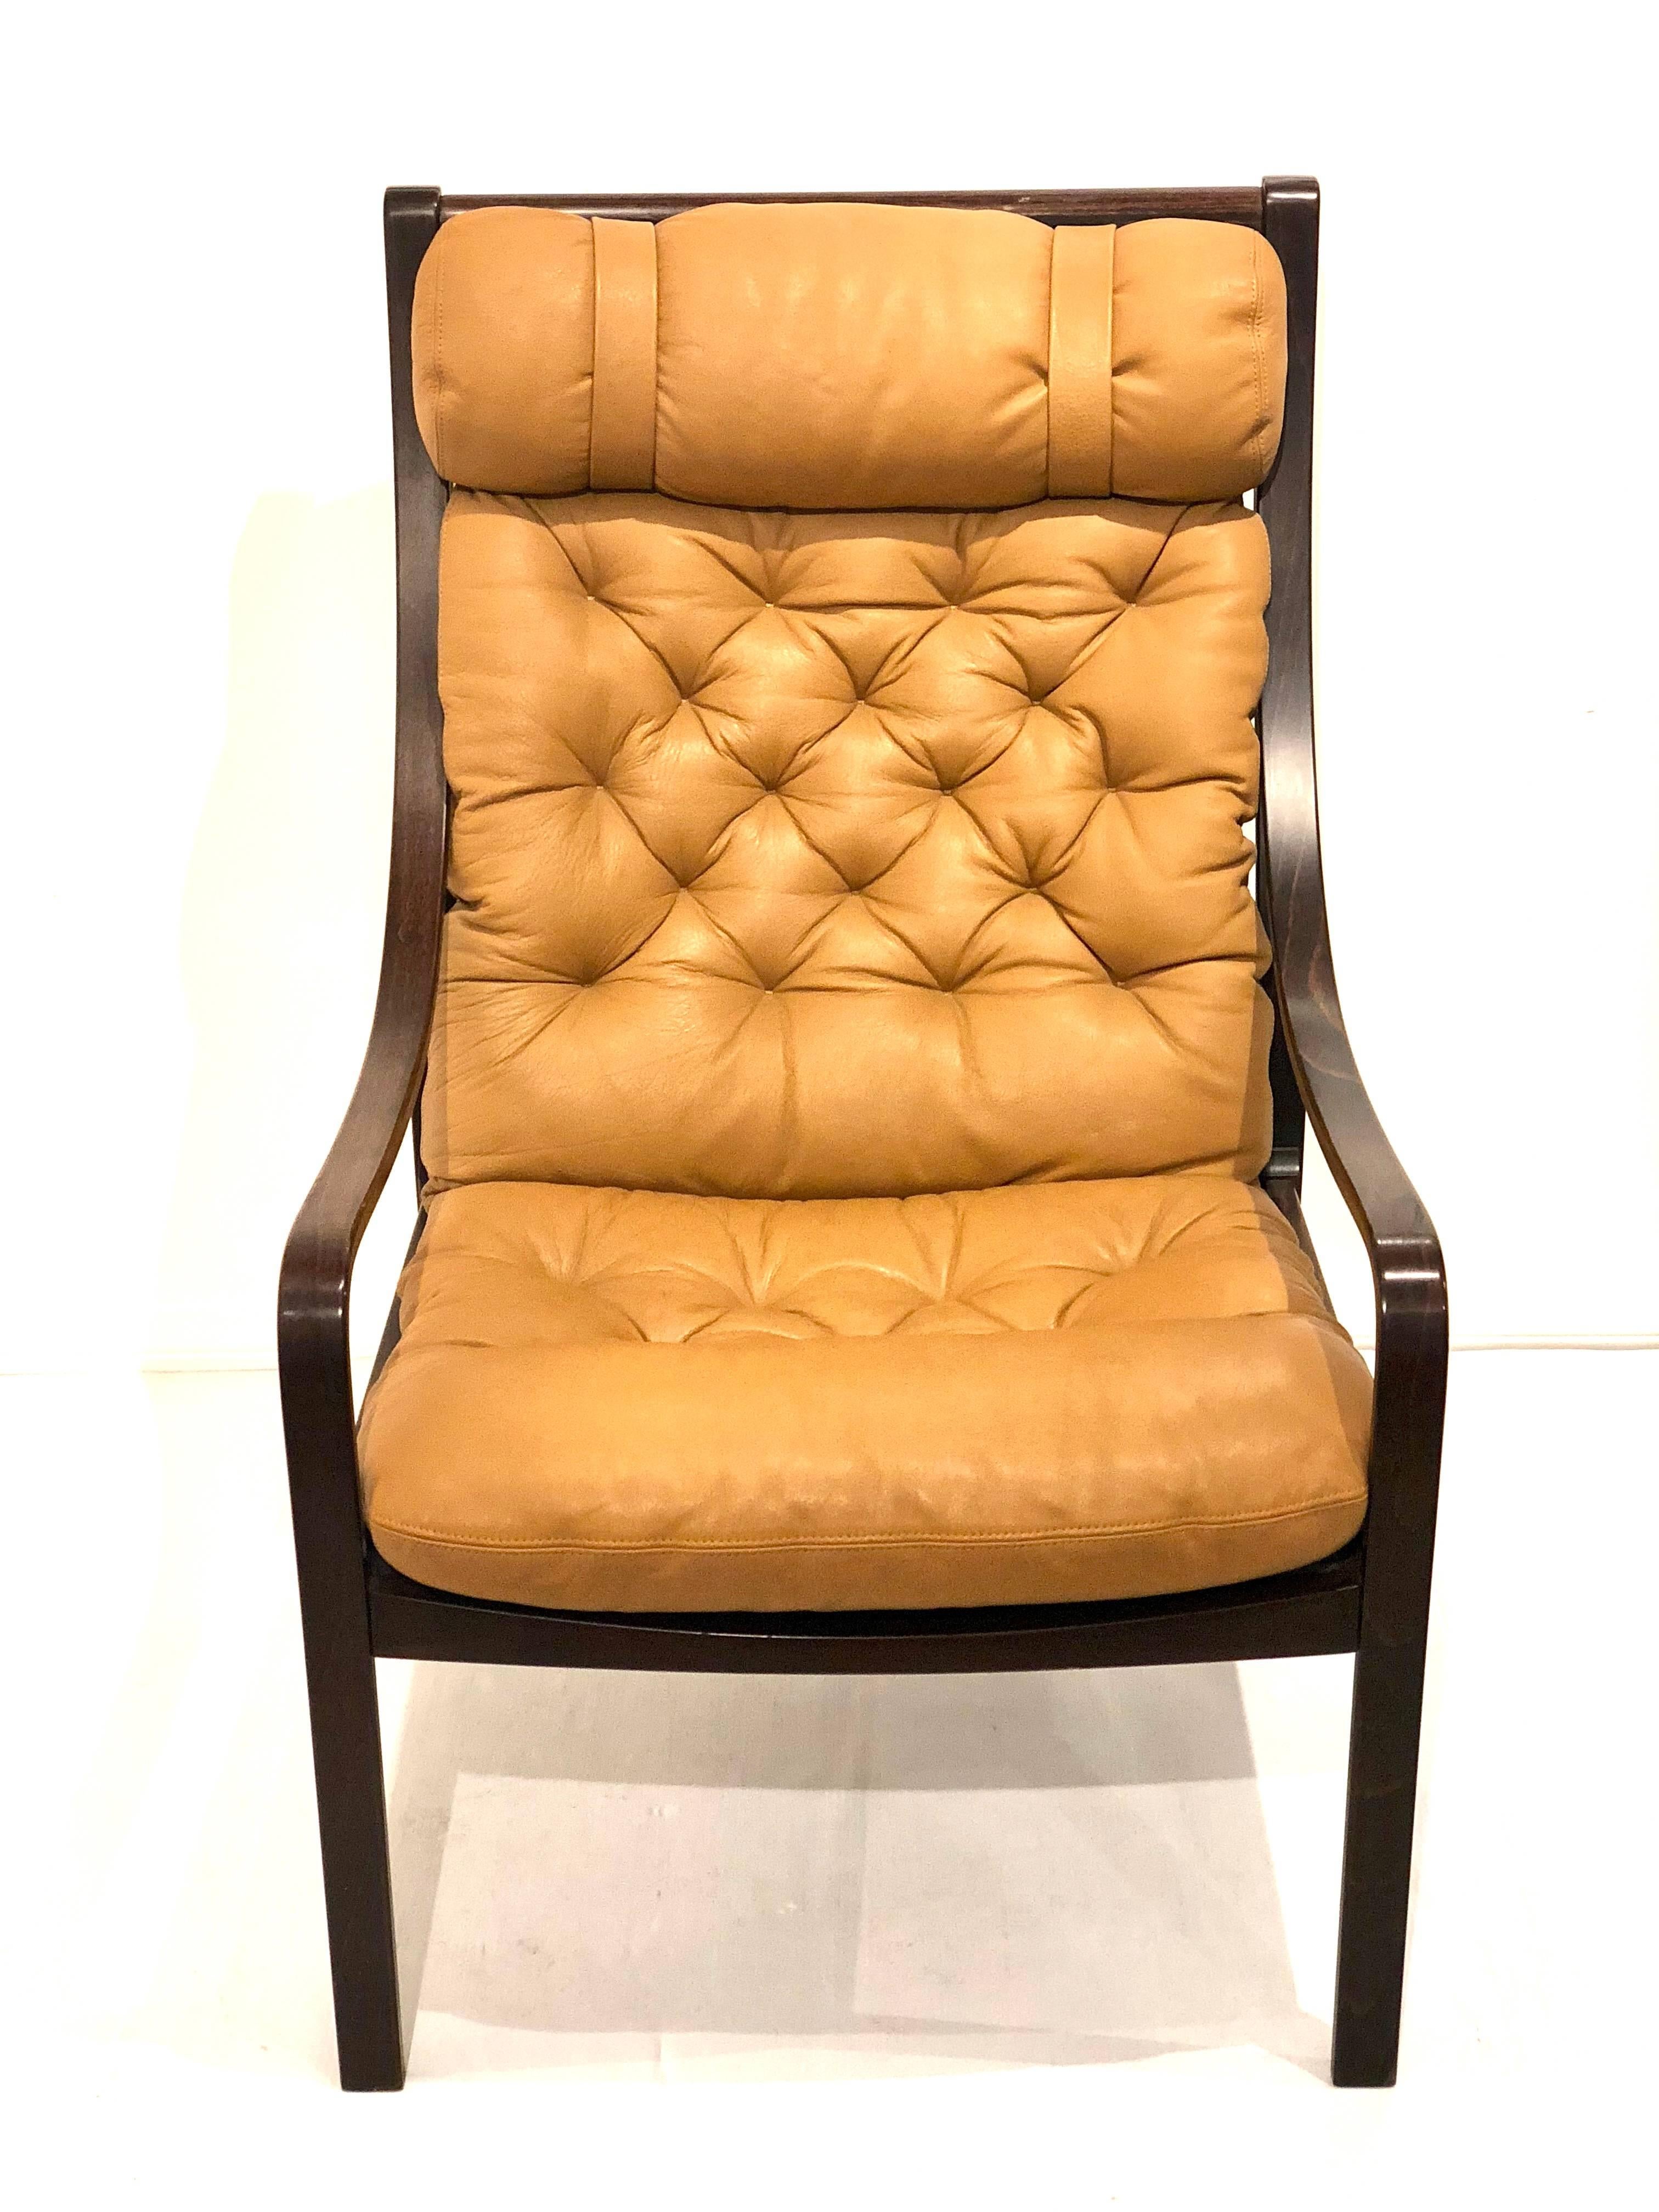 Elegant beautiful bent wood rosewood armchairs with tufted leather seats, in great condition light and comfy chairs, circa 1960s in great original condition.